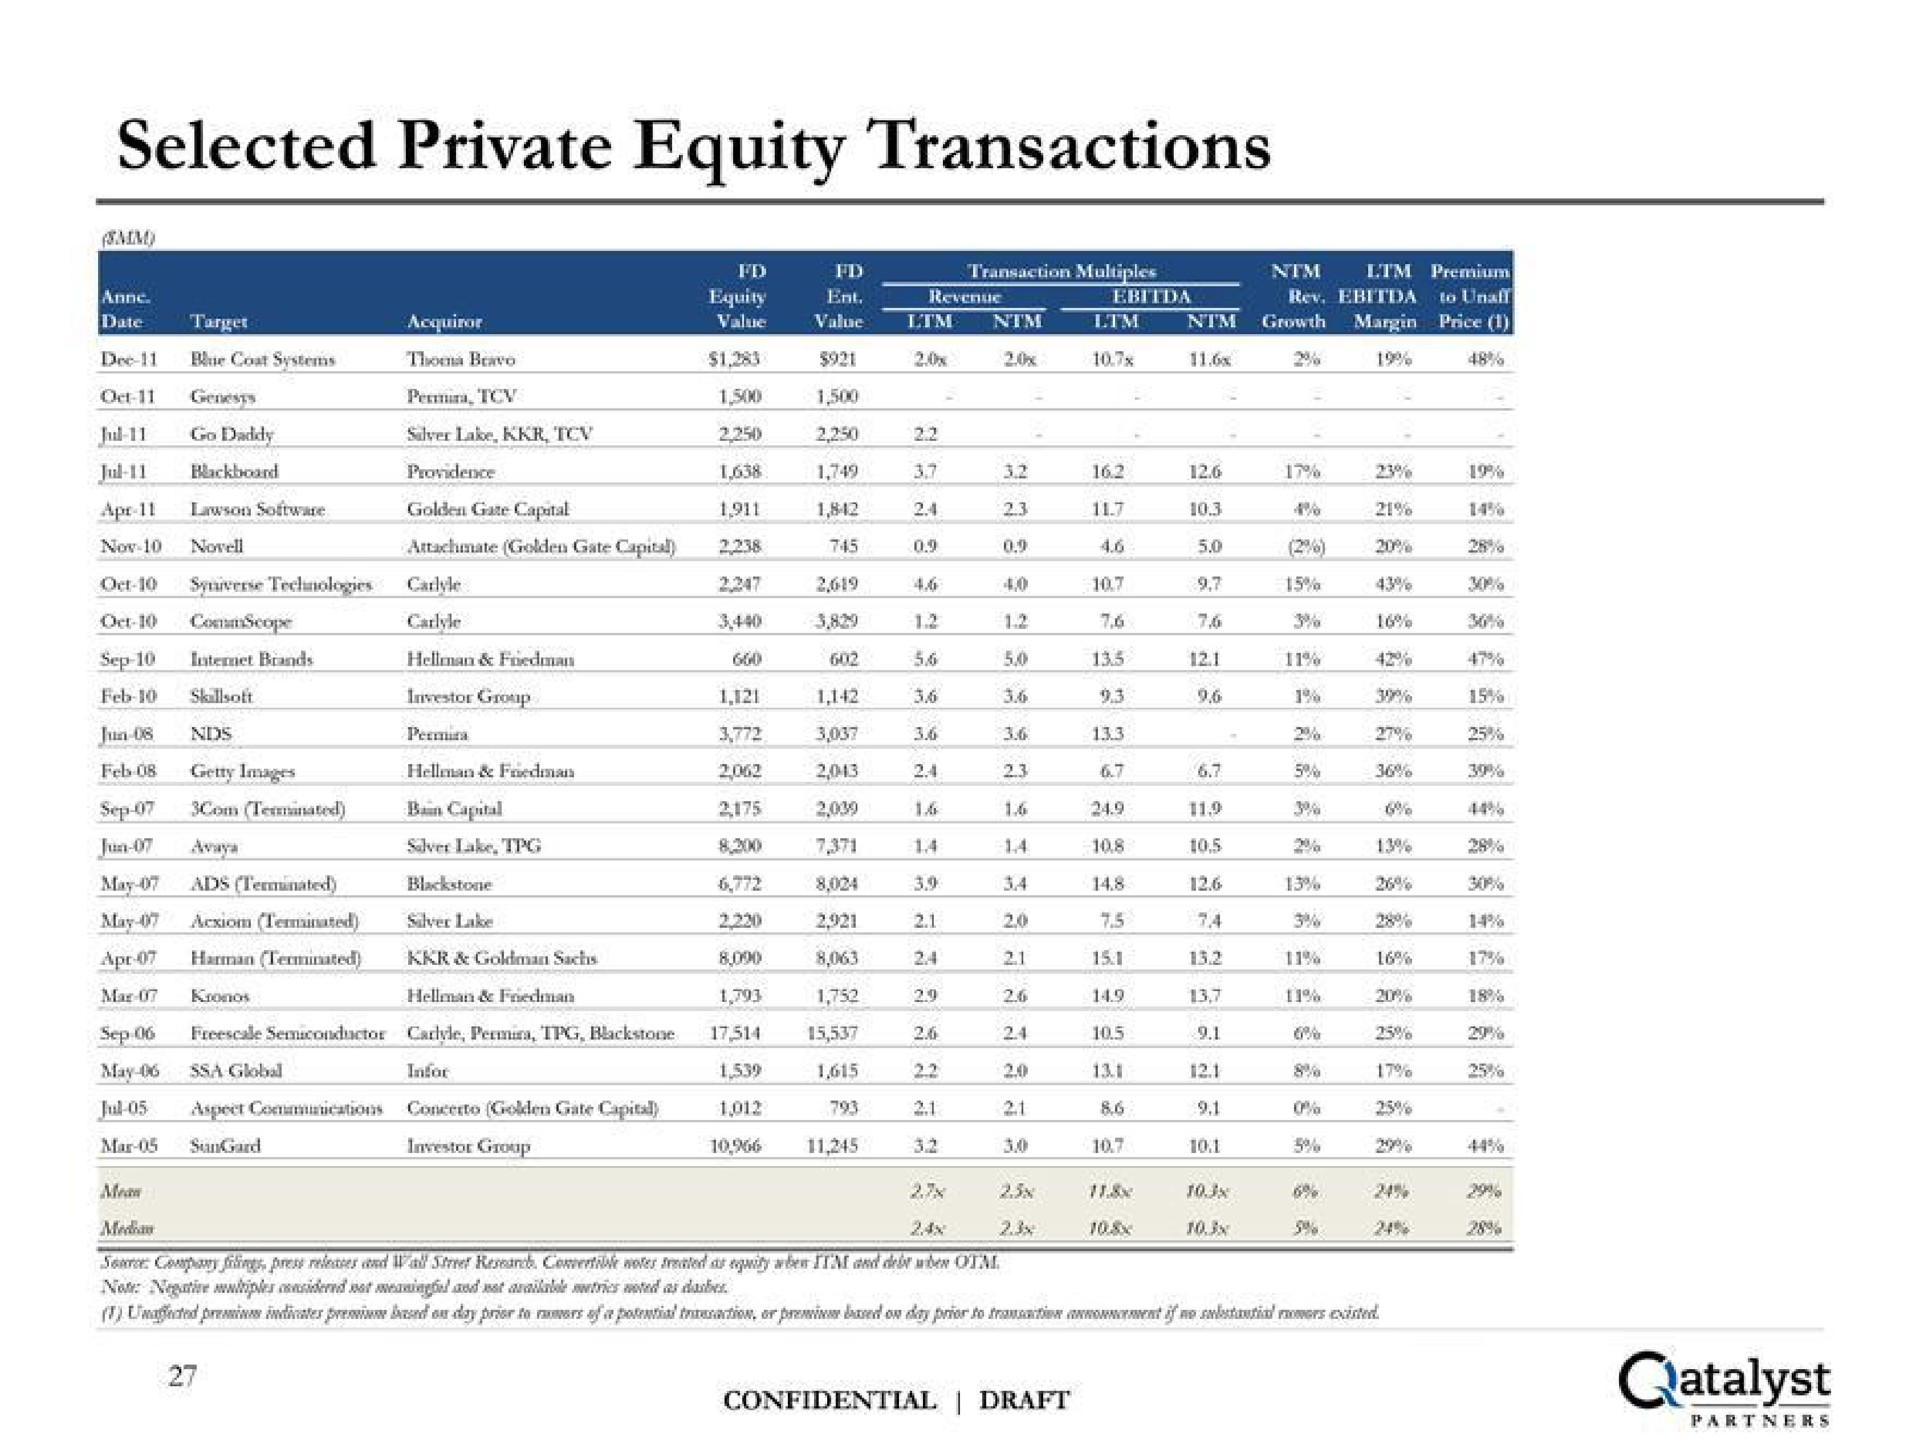 selected private equity transactions | Qatalyst Partners